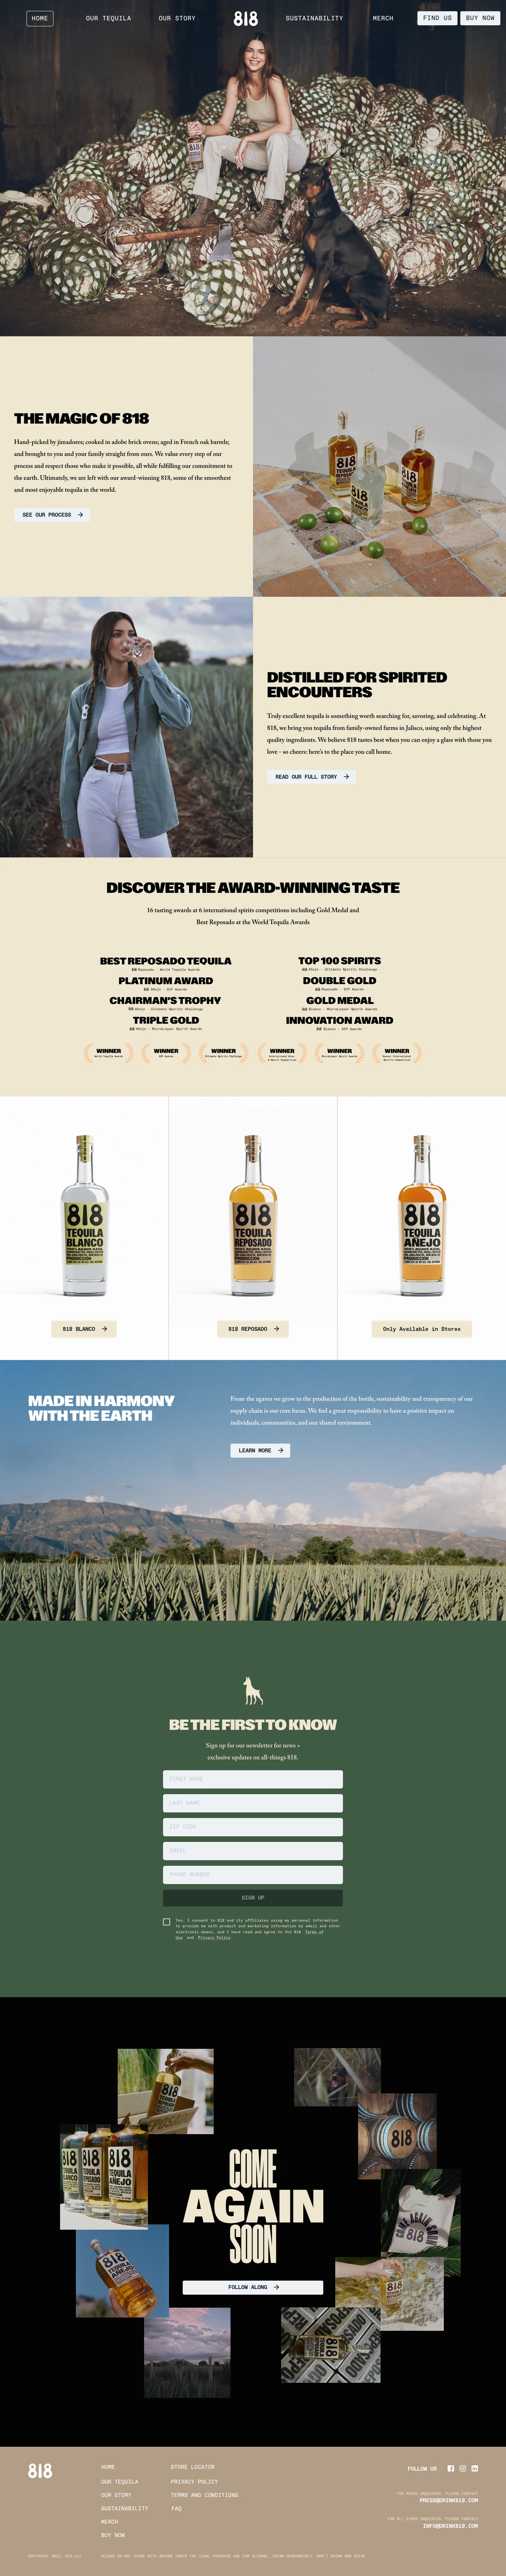 818 Tequila Landing Page Example: Made from 100% Blue Weber Agaves in Jalisco, Mexico, we are proud to introduce Kendall Jenner's award-winning 818 Tequila. Hand-picked by jimadores, slow cooked in adobe brick ovens, and brought to you and your family straight from ours. We hope you enjoy it as much as we do.